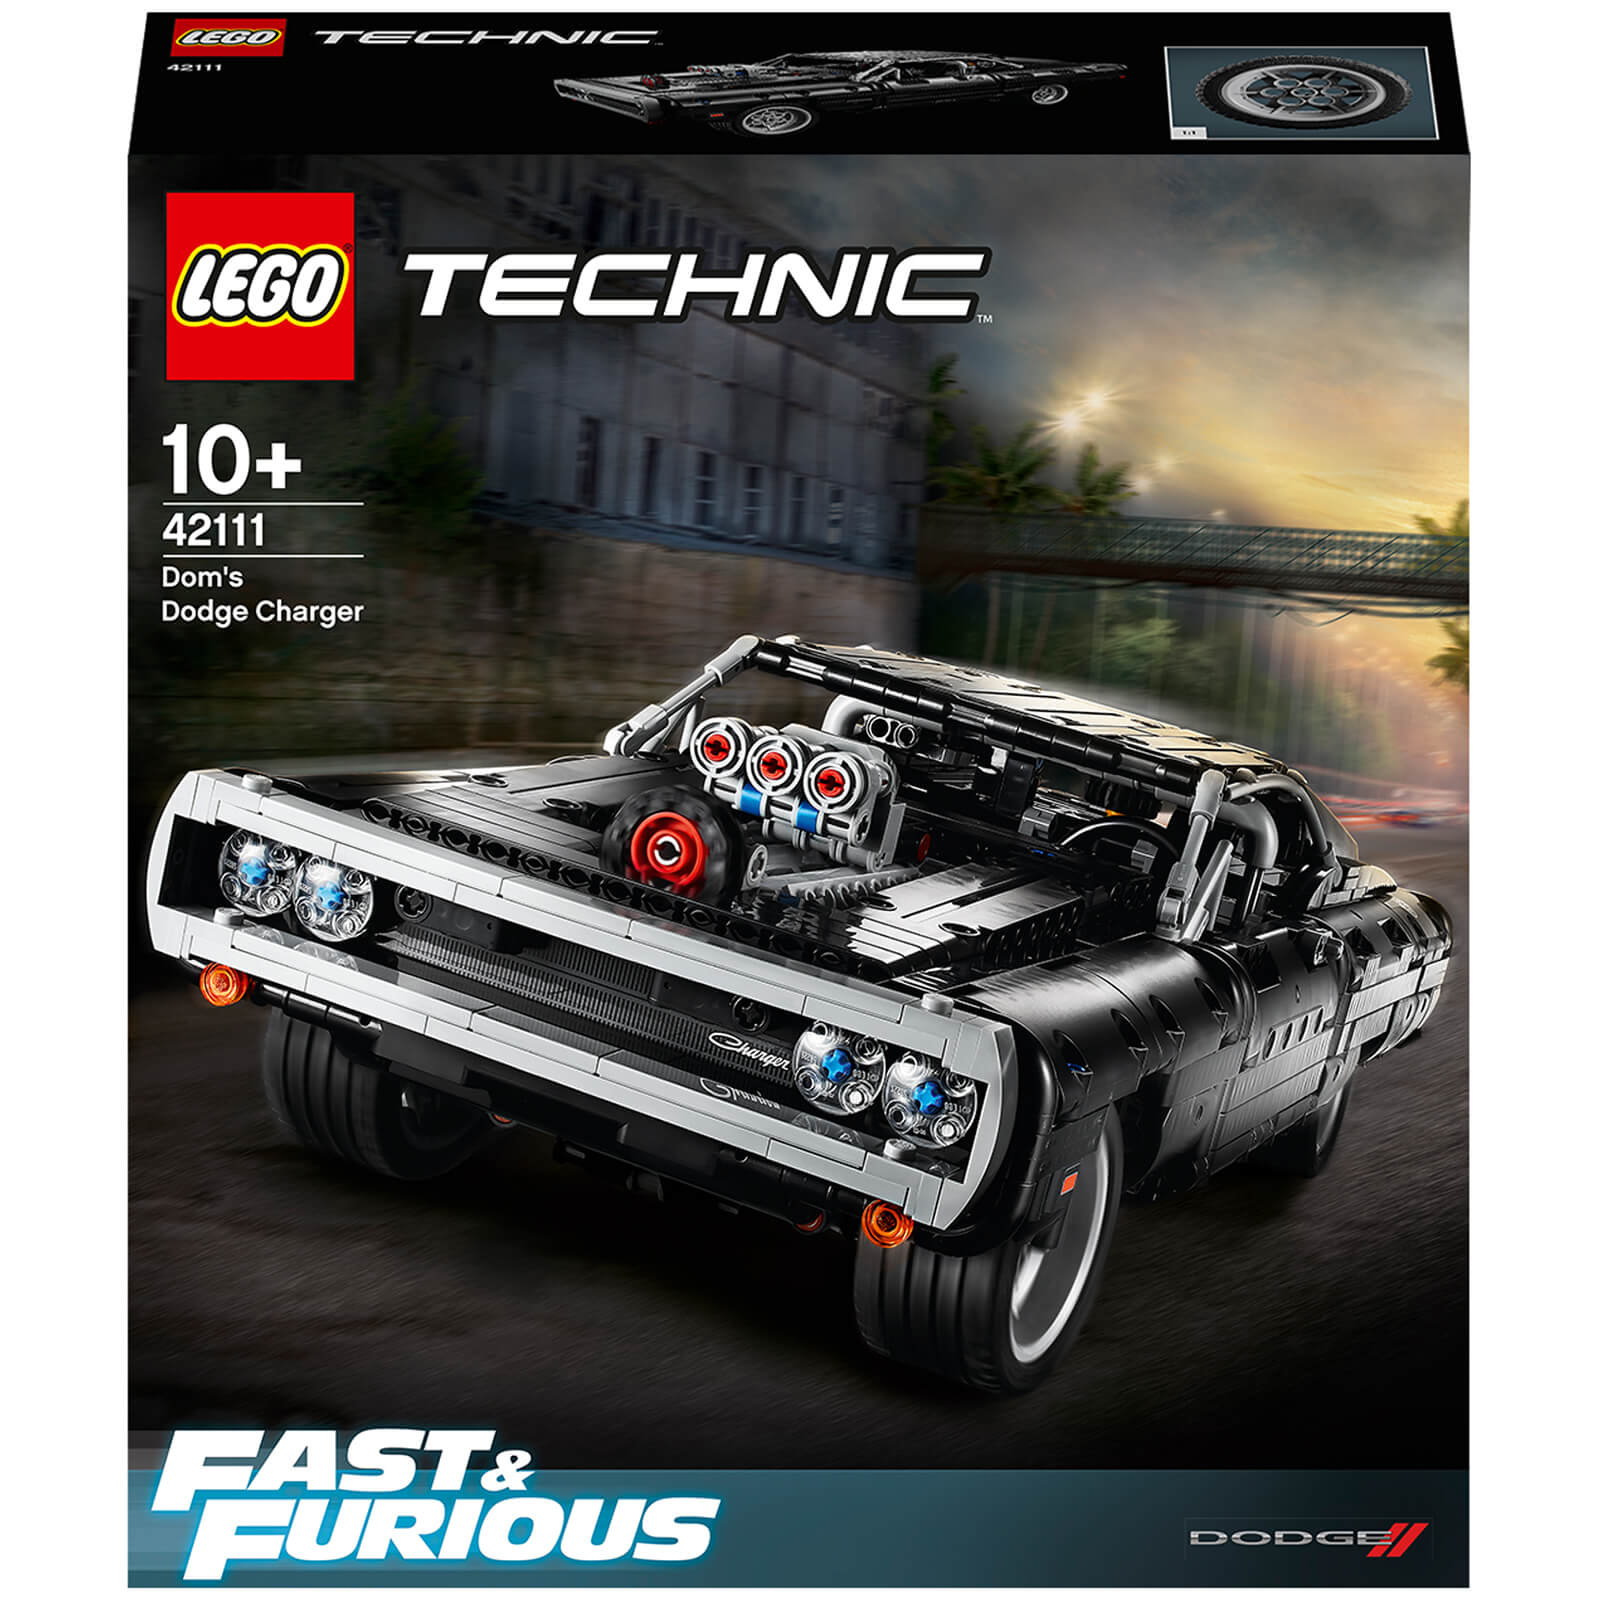 LEGO Technic: Fast & Furious Dom's Dodge Charger Set (42111)